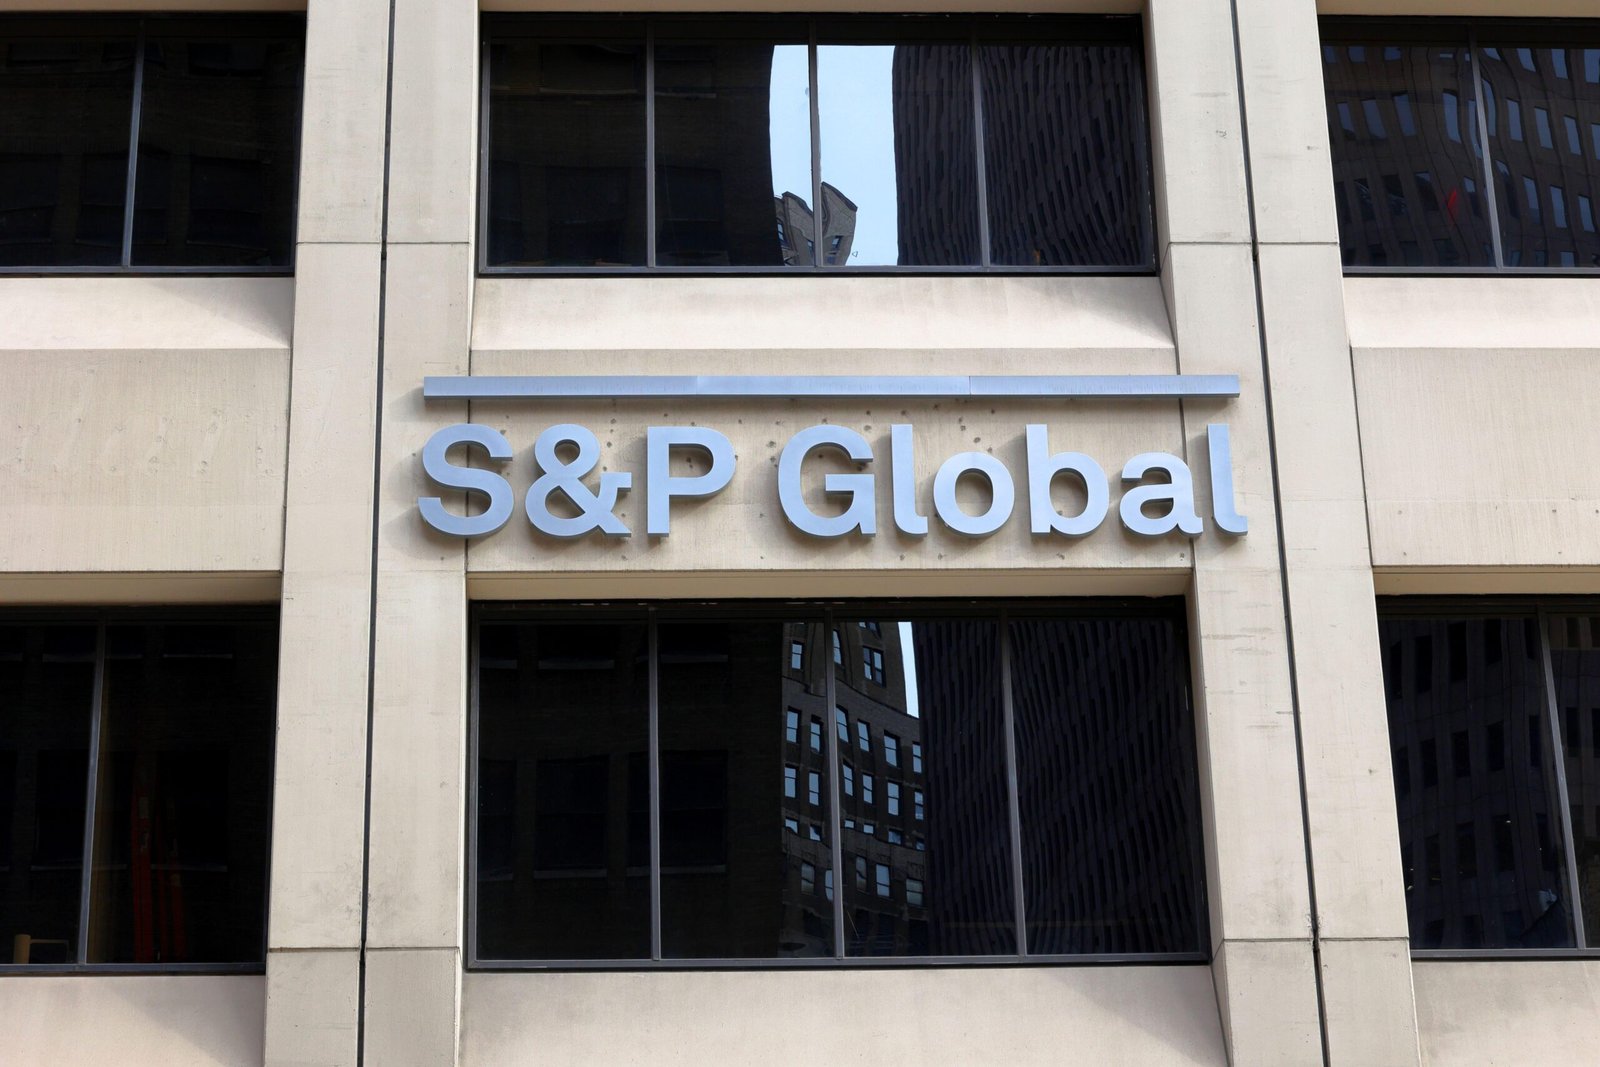 S&P global forecasts 450bps policy rate cut by year’s end